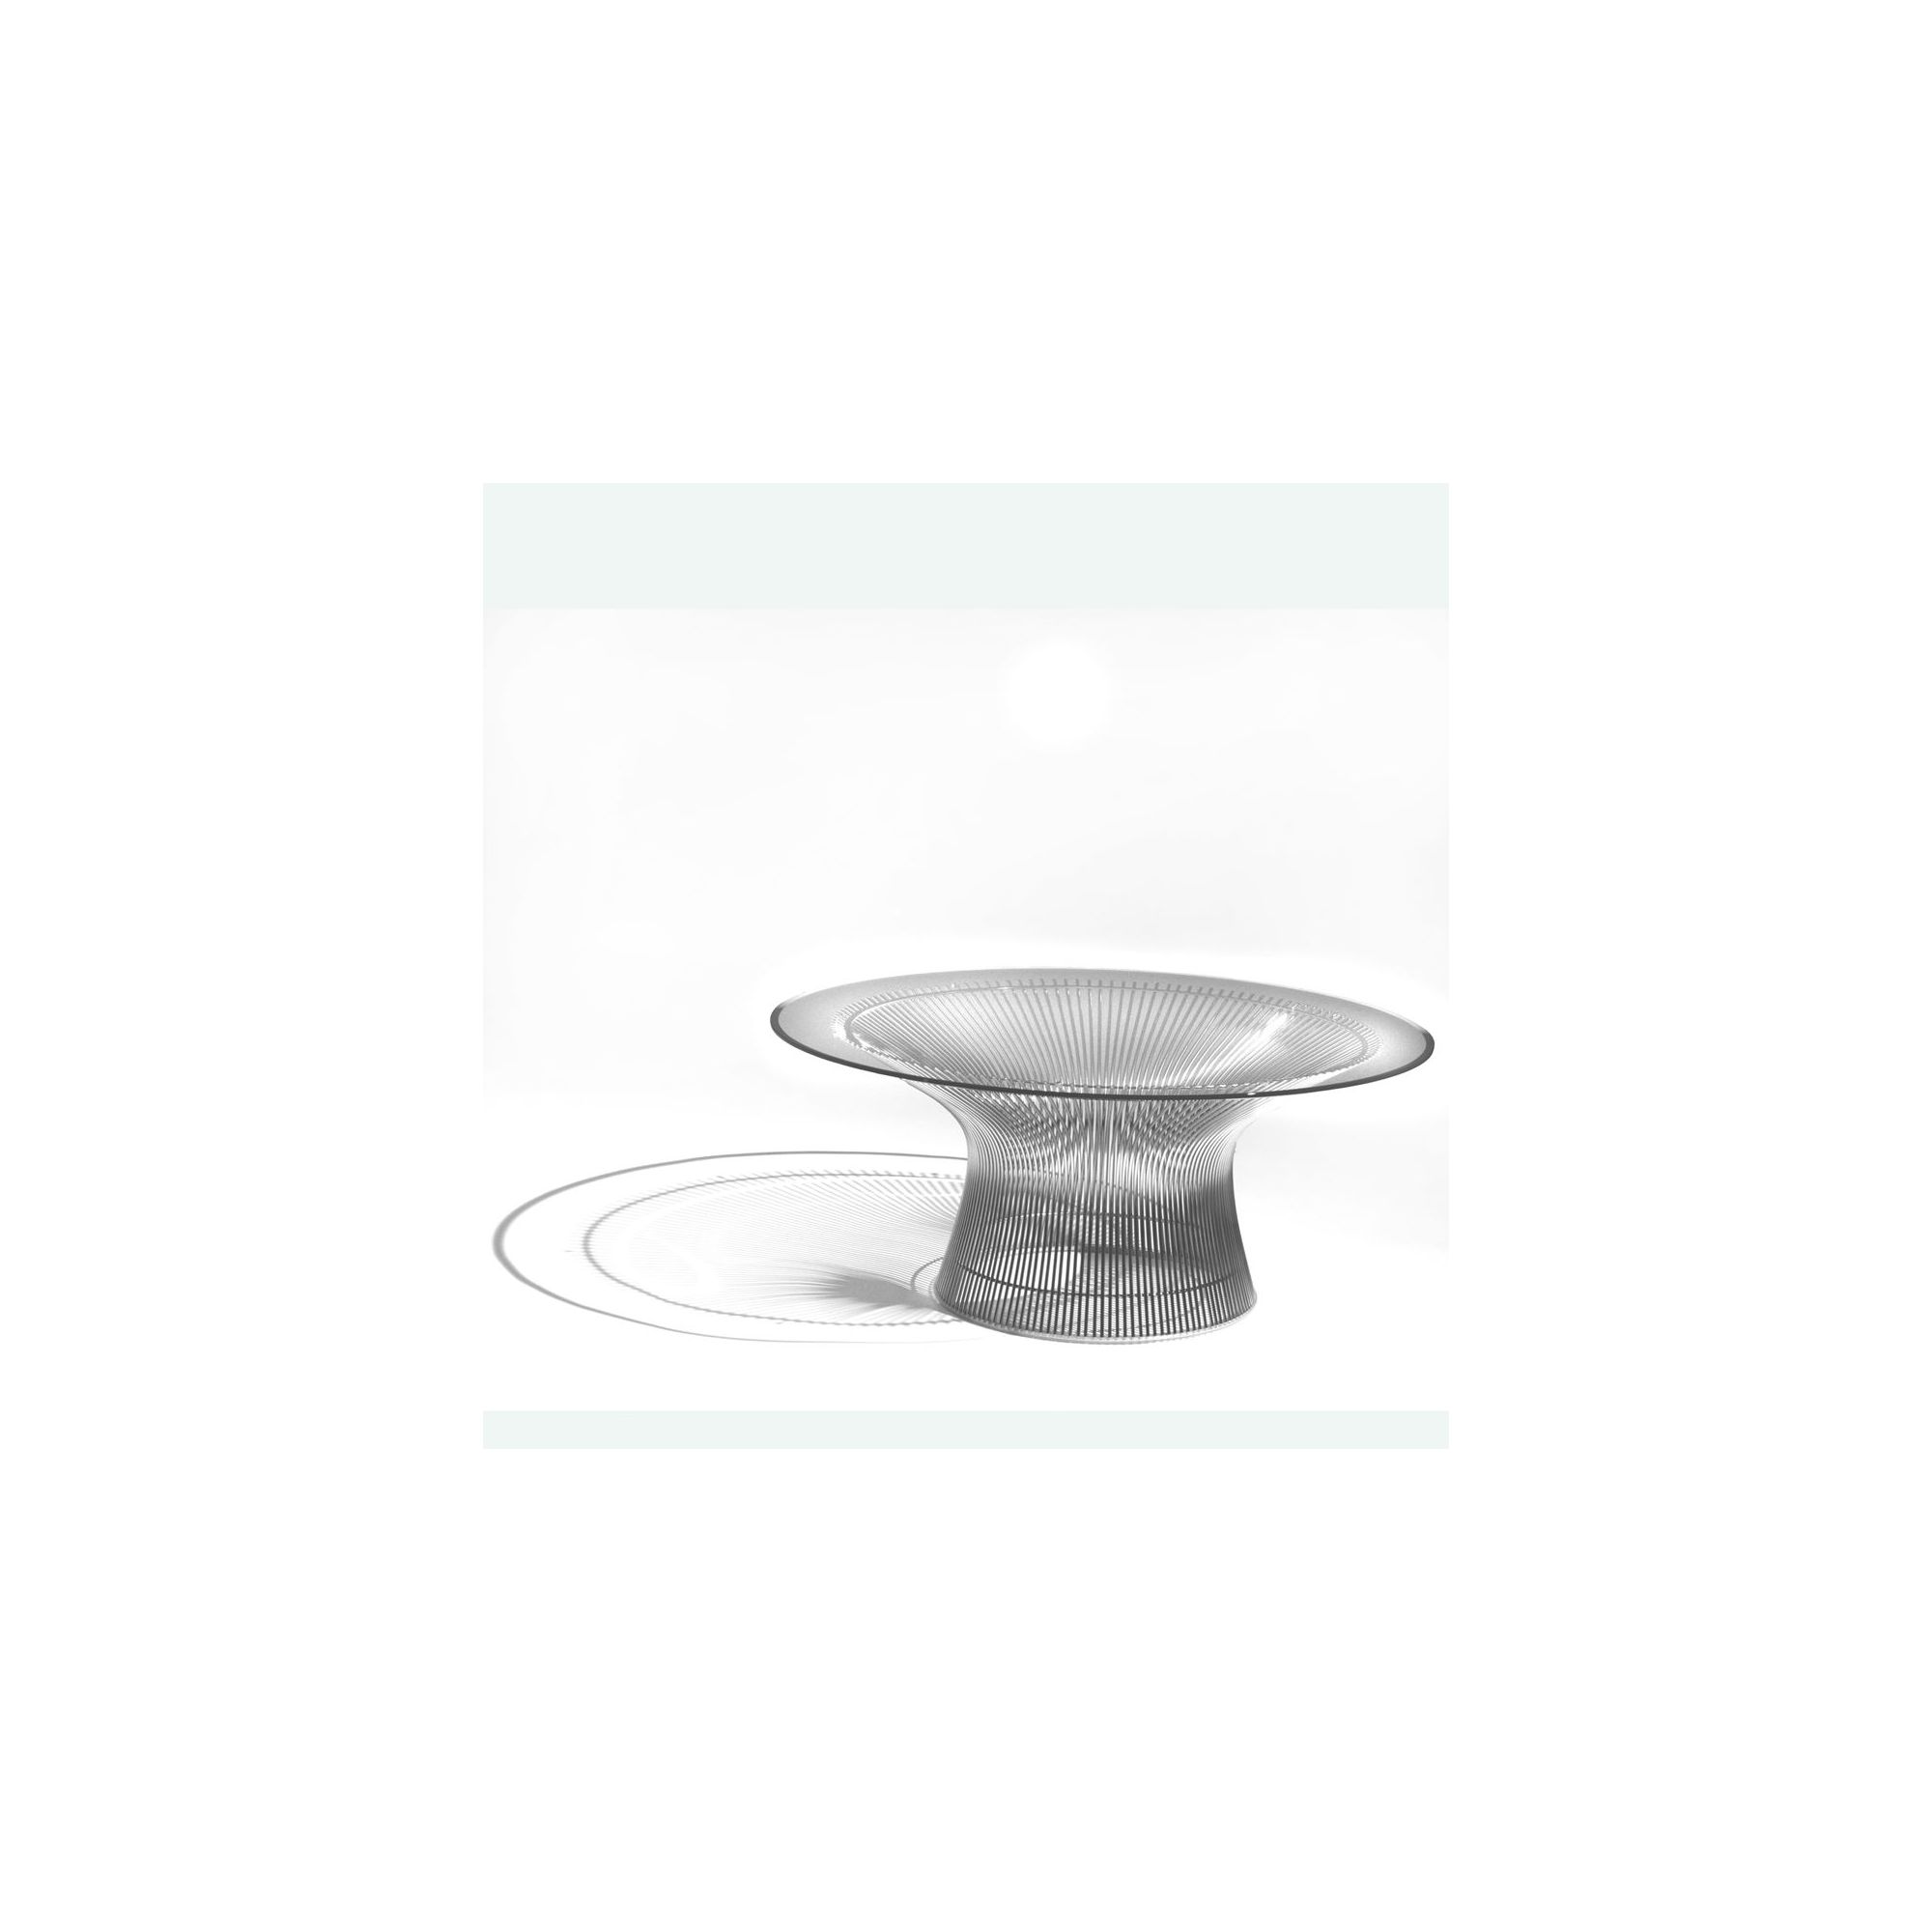 Knoll Coffee Table by Warren Platner - 91.5cm Dia / Polished Nickel / Bronze Glas at Tesco Direct